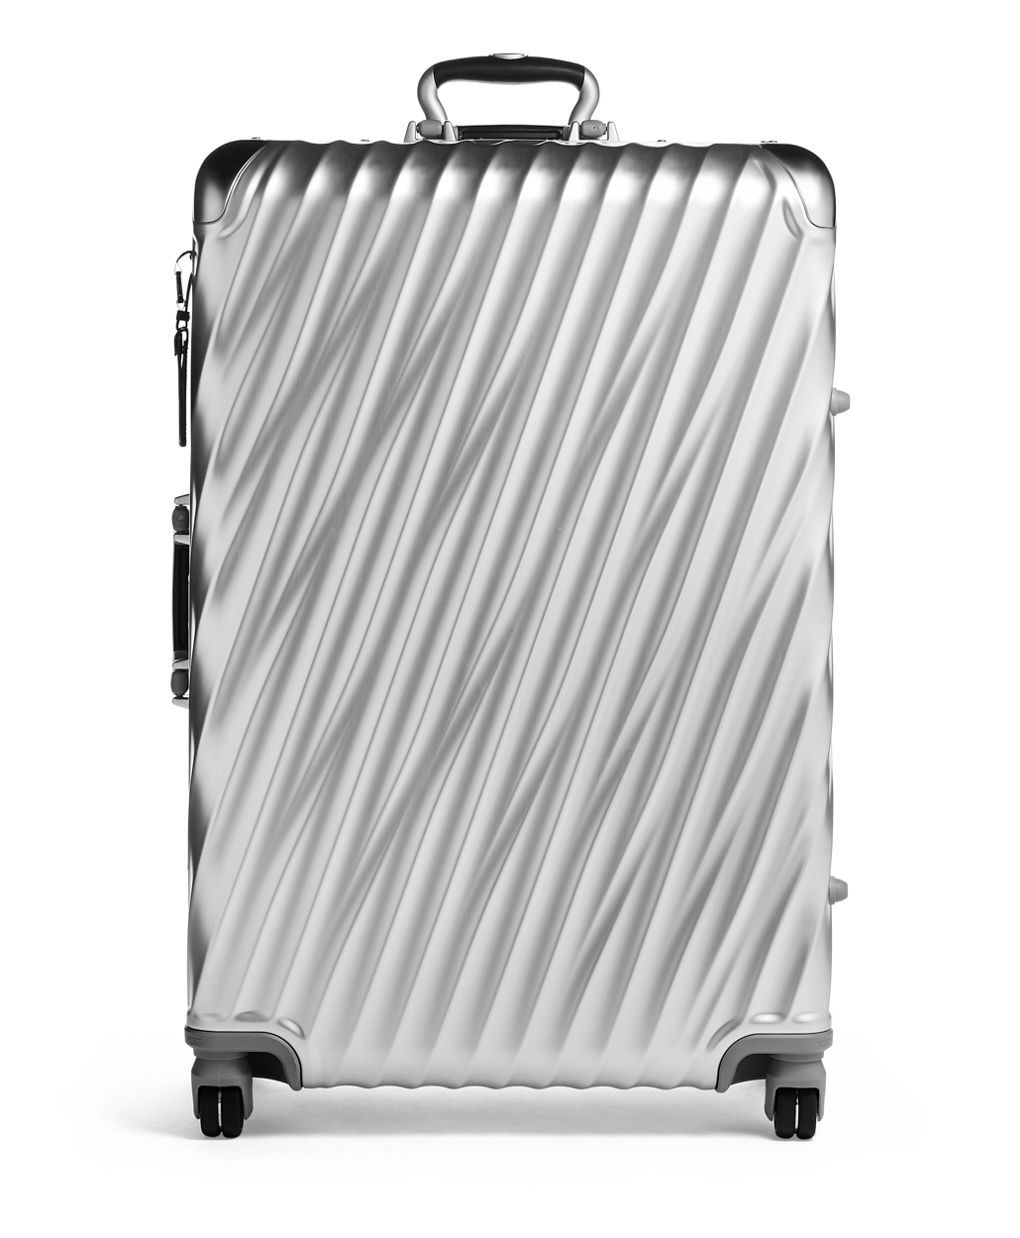 Extended Trip Packing Case | Tumi